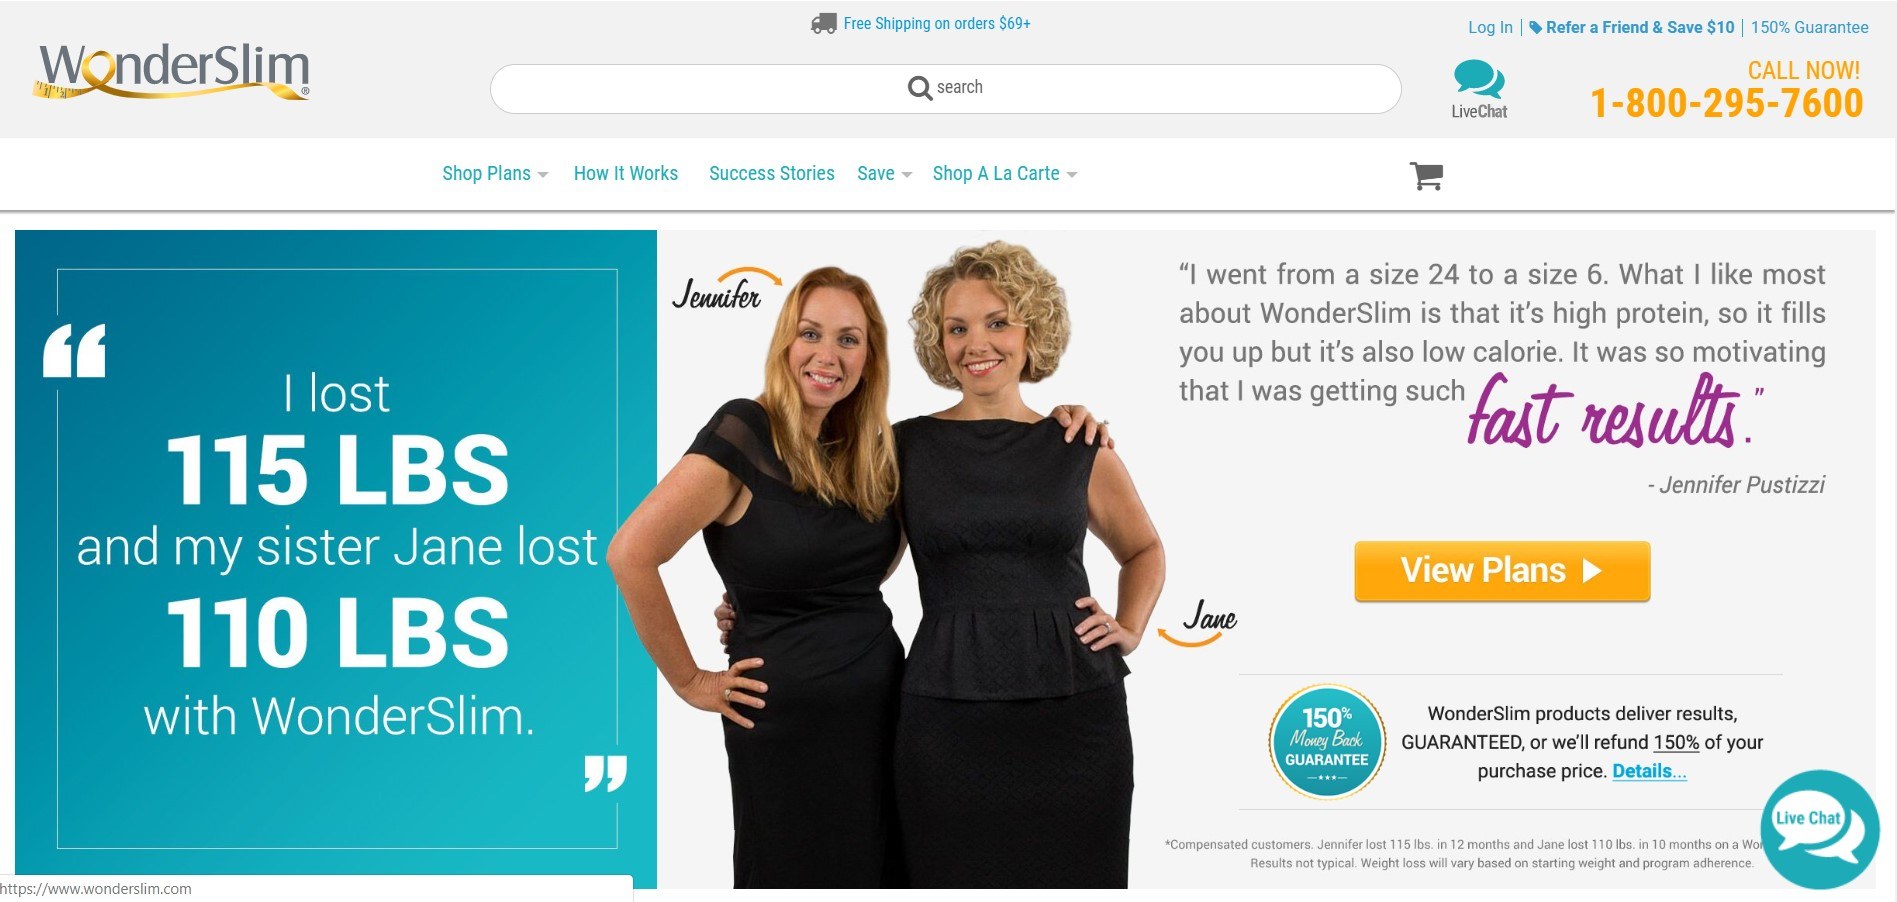 This screenshot includes an image of two sisters wearing black who both lost several pounds using the Wonderslim meal replacements.